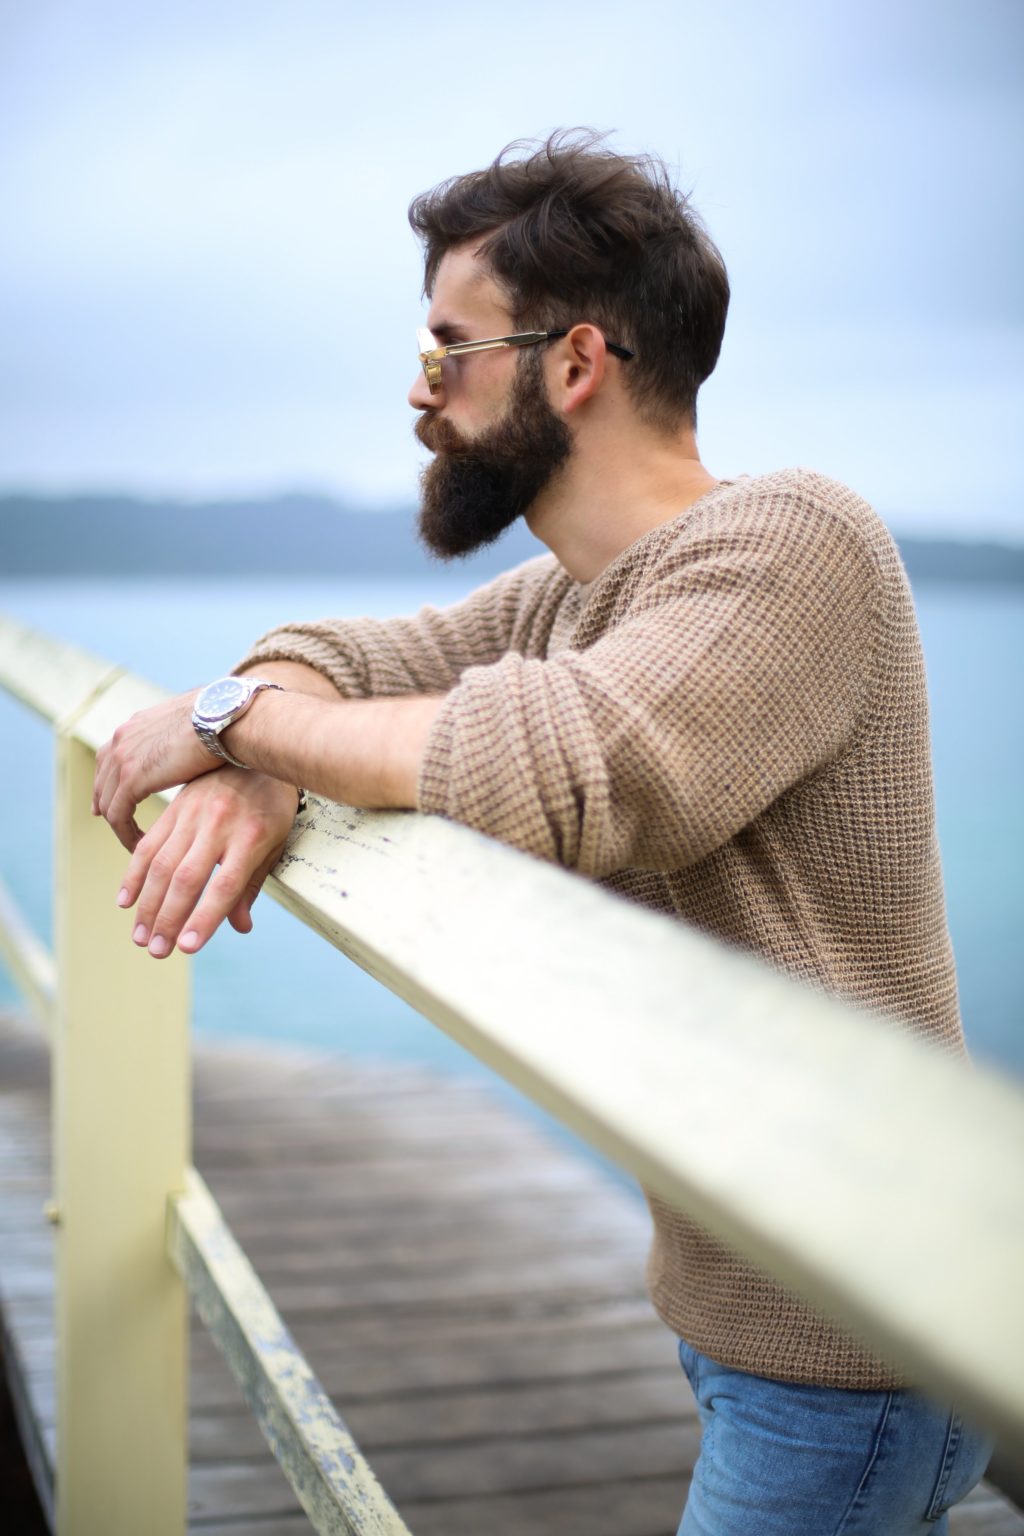 All You Need to Know About Caring For Your Beard